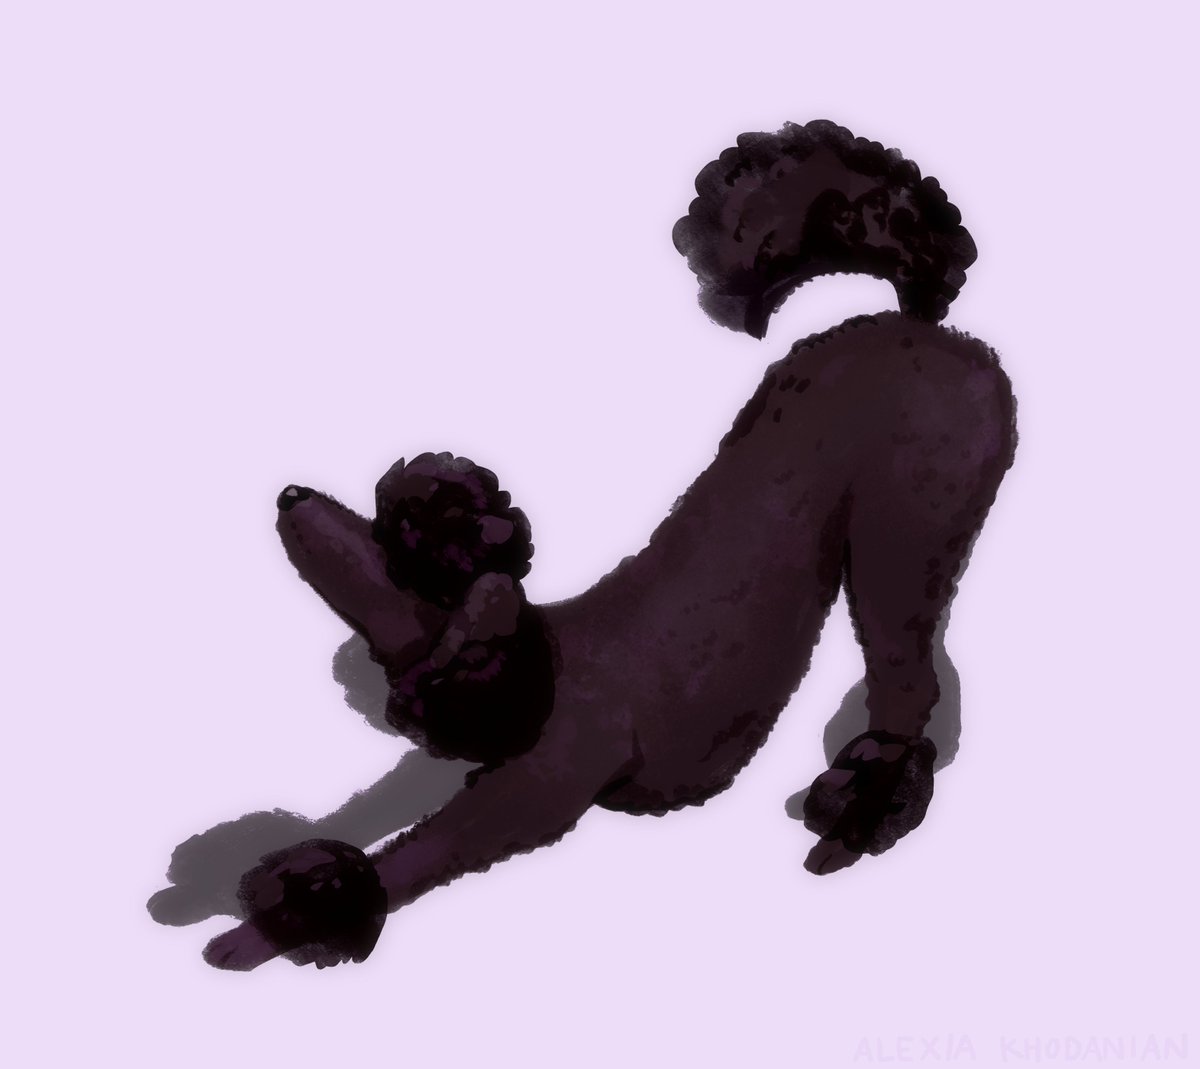  #doggust day 9: Poodle! AKA my twin!! fell behind on posting these but I'm gonna catch right up!